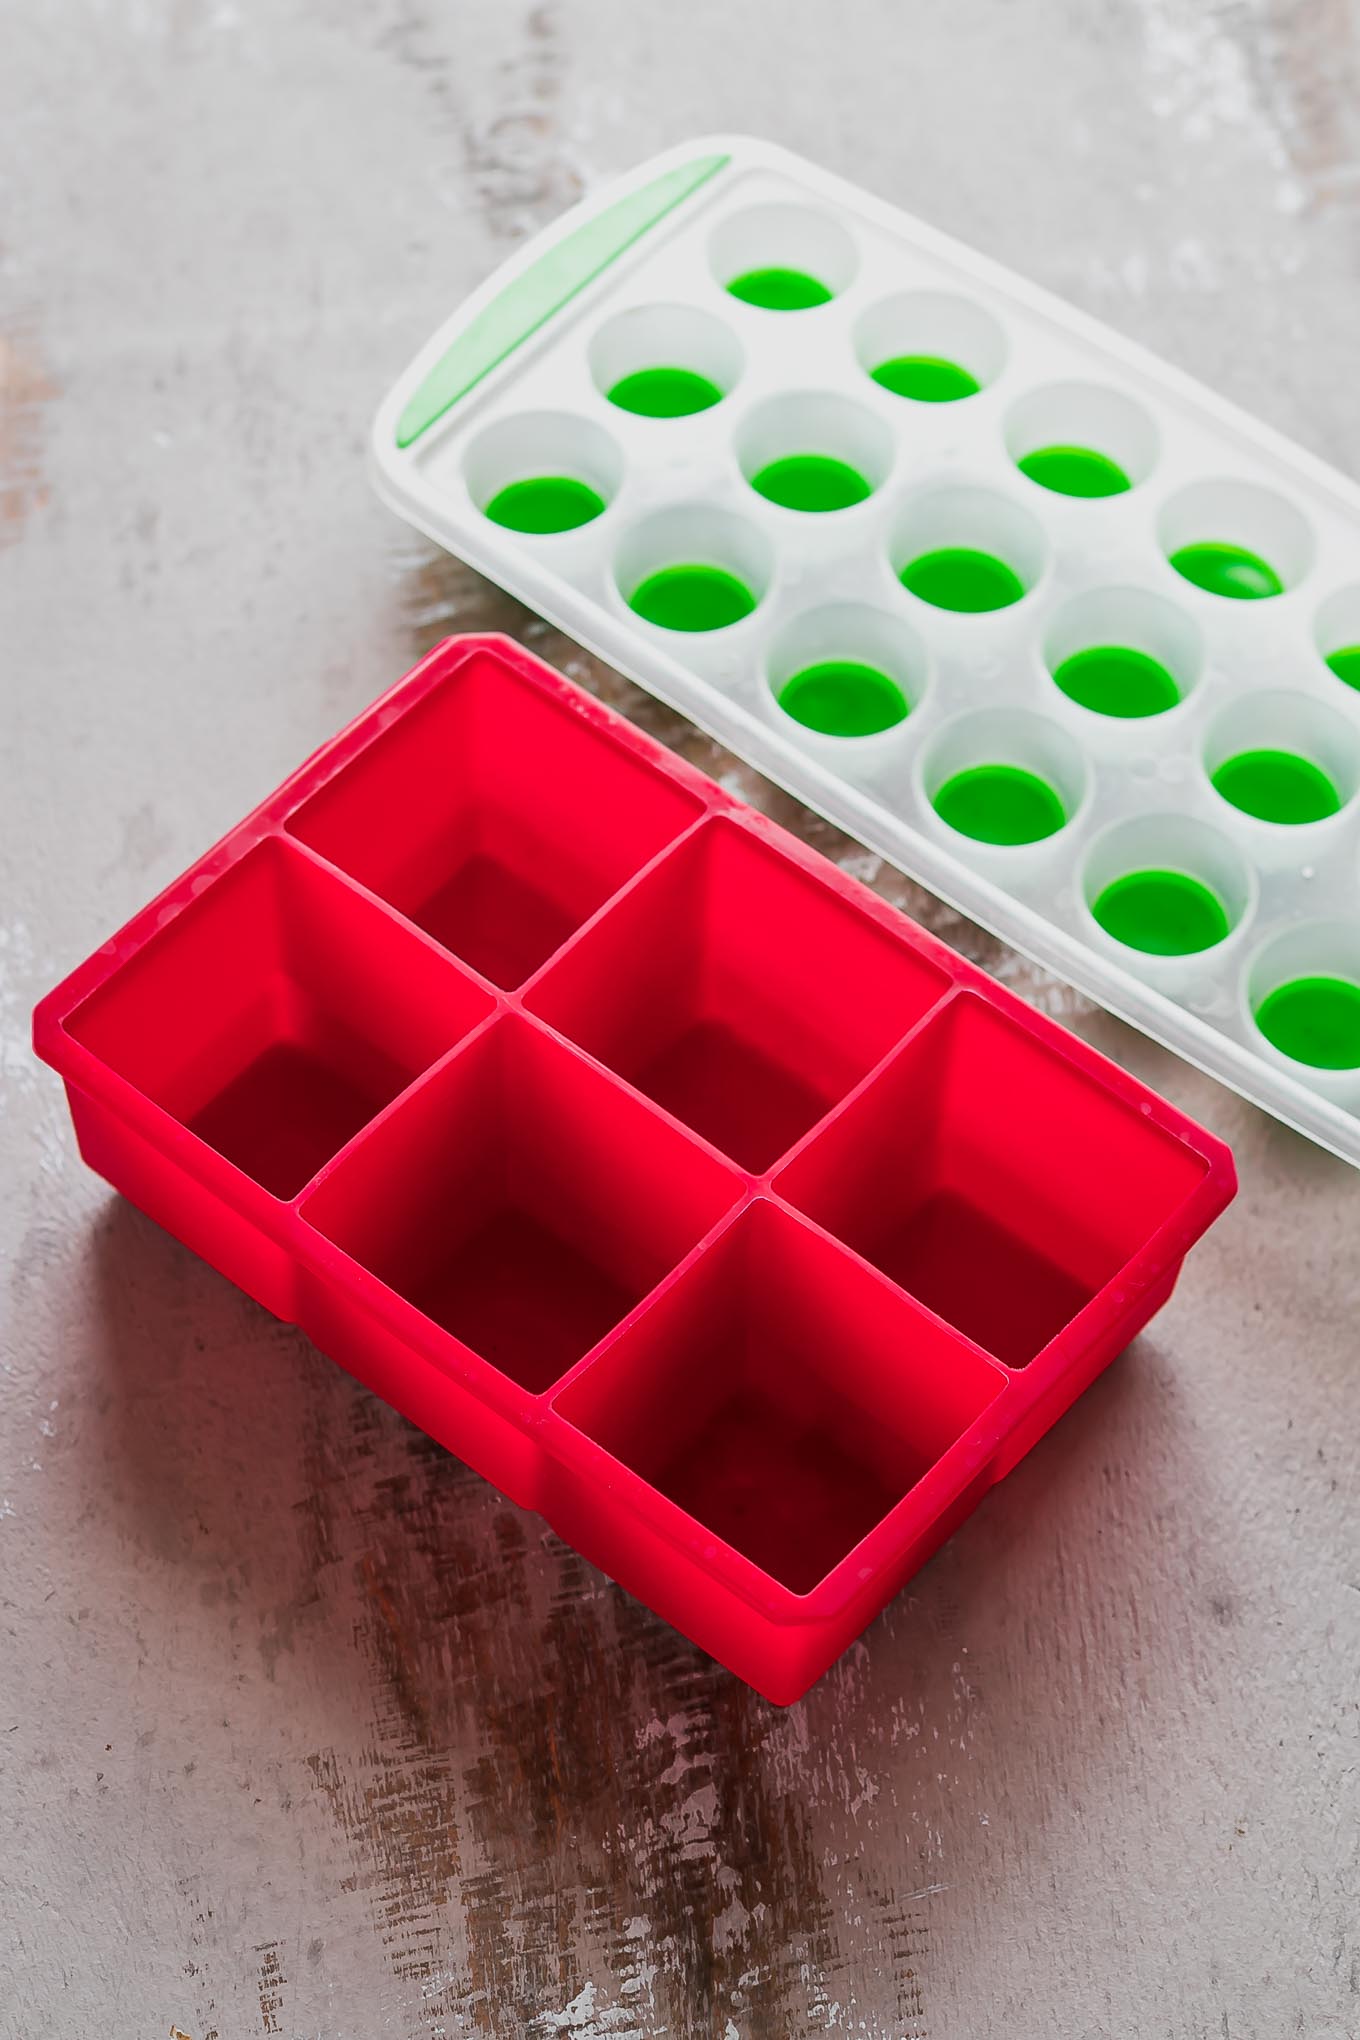 Best ice cube tray 2022: From silicone moulds to trays with lids